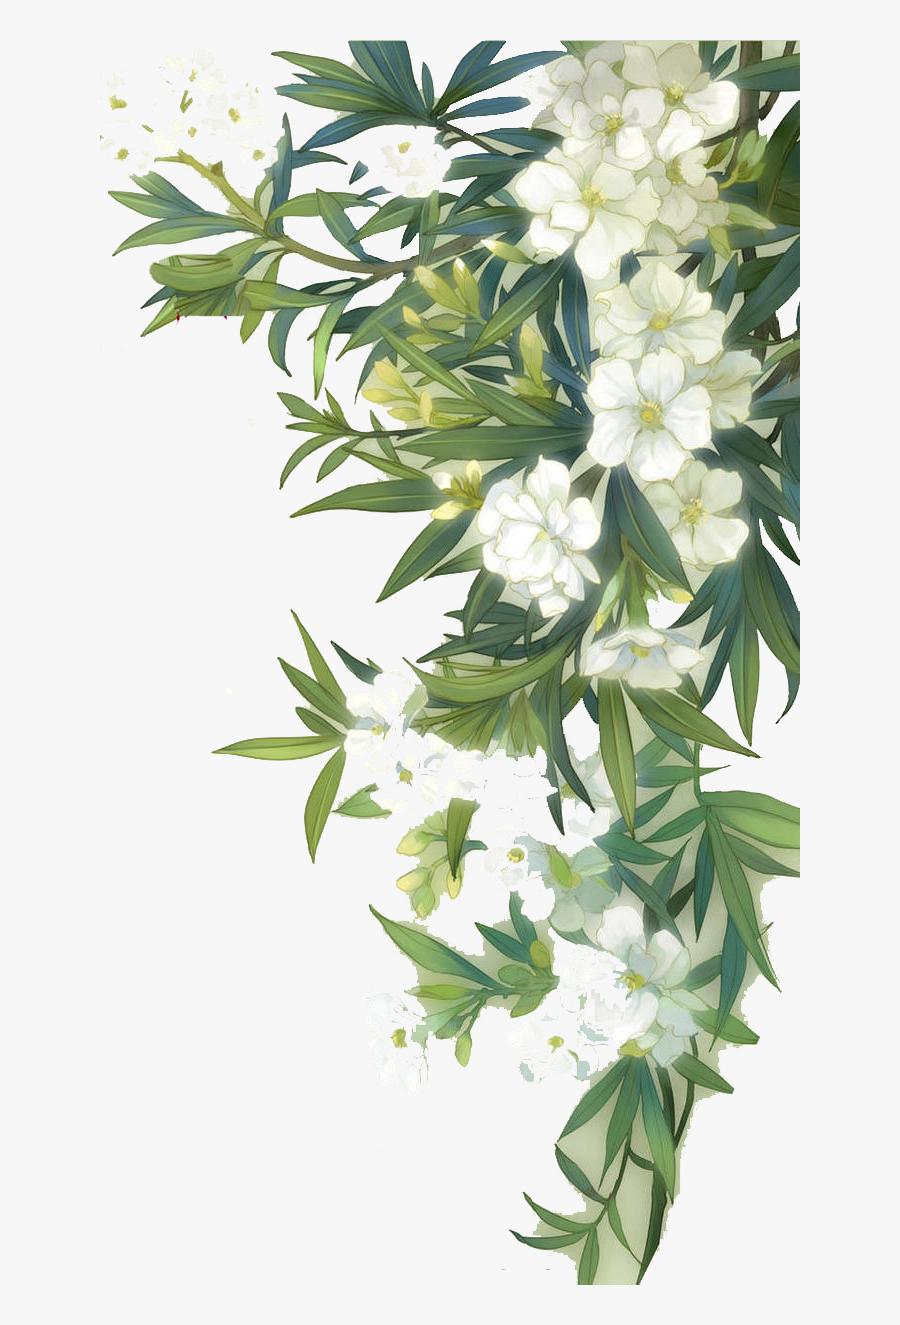 And Familiar Leaves Watercolour Green Blooming Wild - Leaves And Flower Png, Transparent Clipart